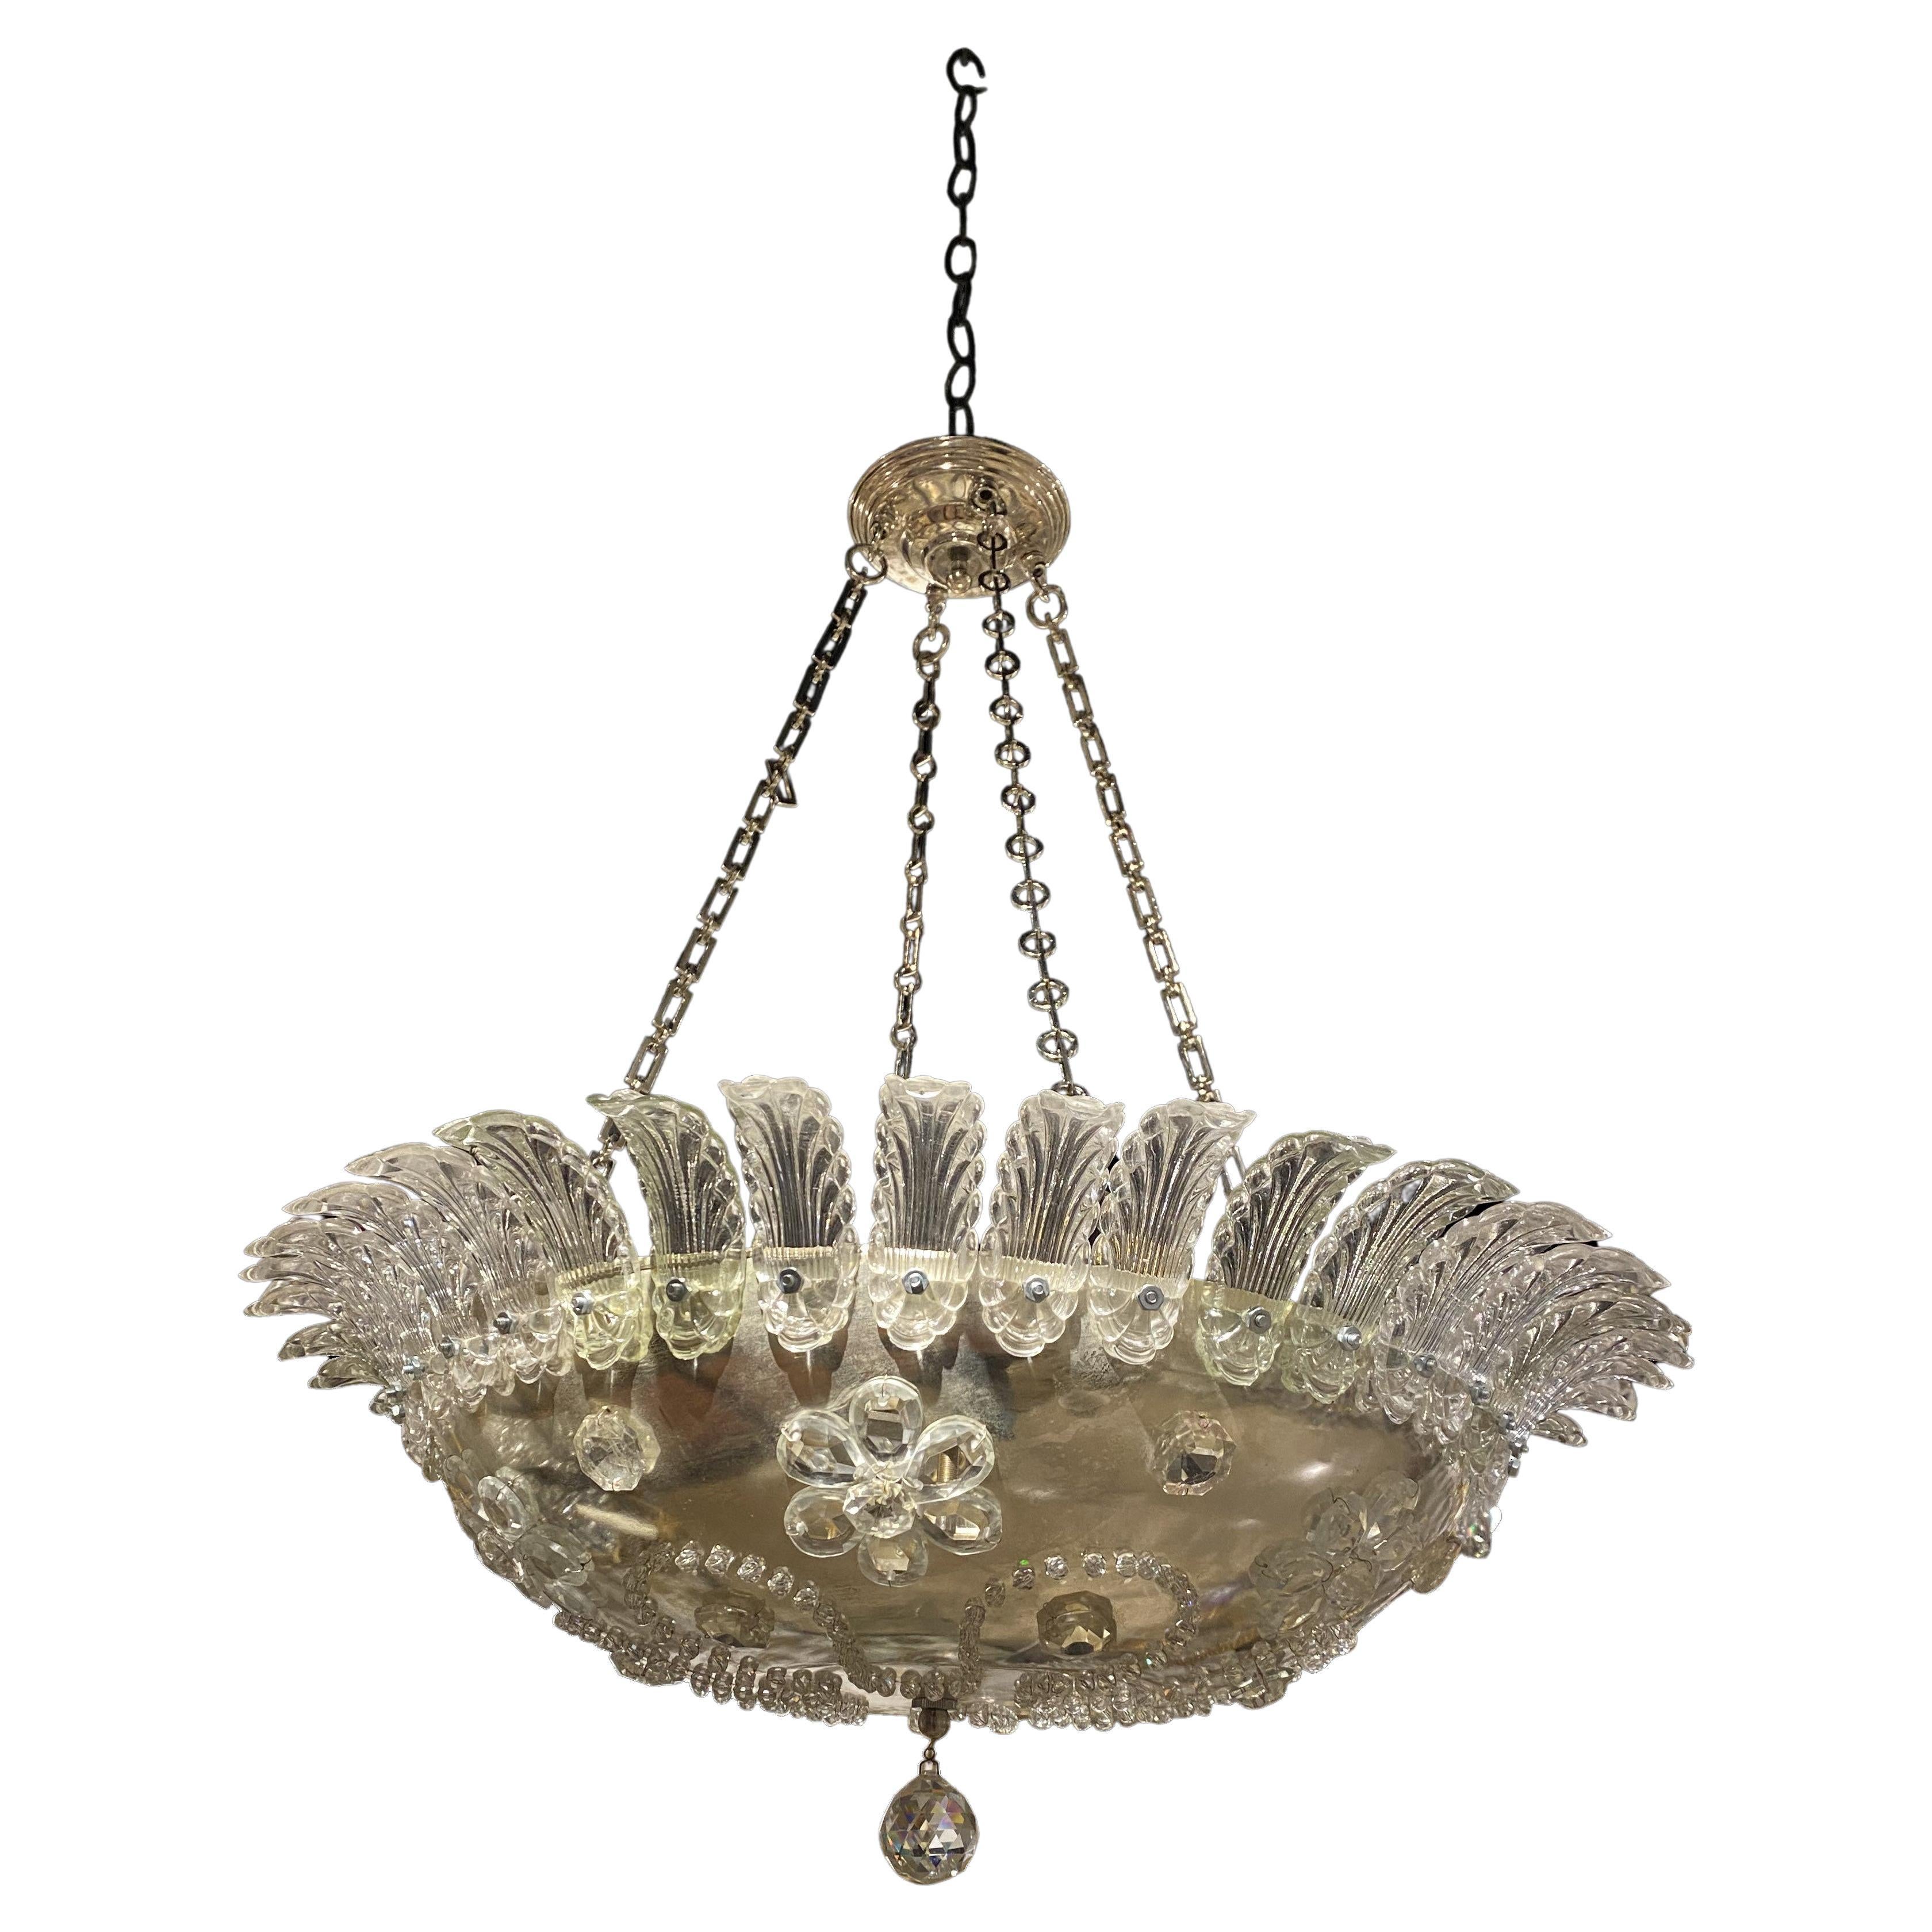 1930's French Silver Plated Light Fixture with Crystals Flowers 